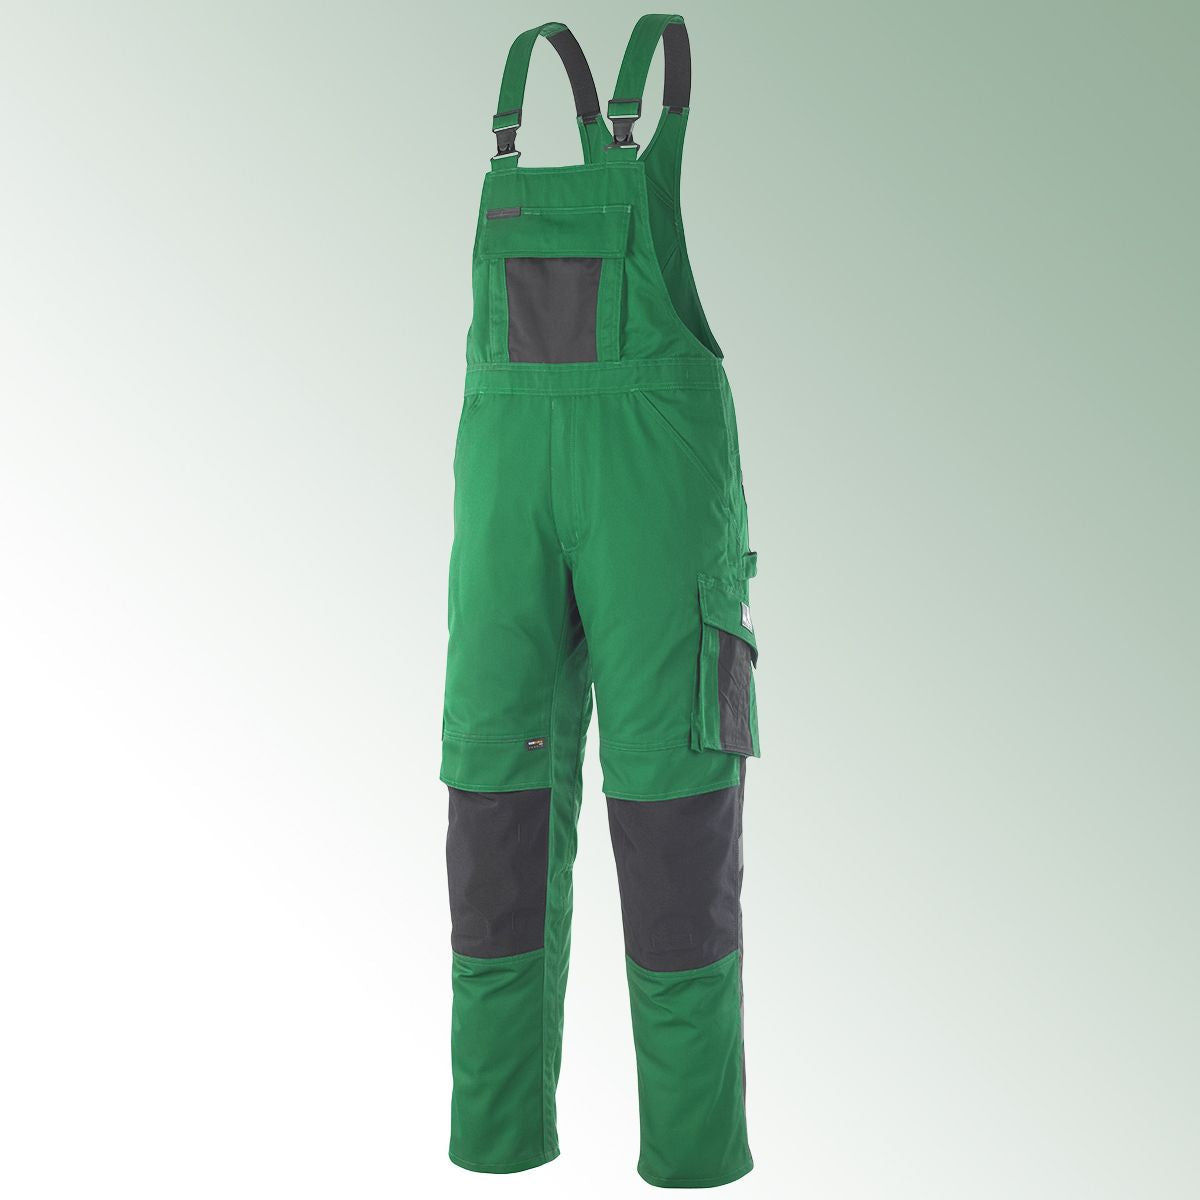 Dungarees Augsburg Size 54 Green / Black